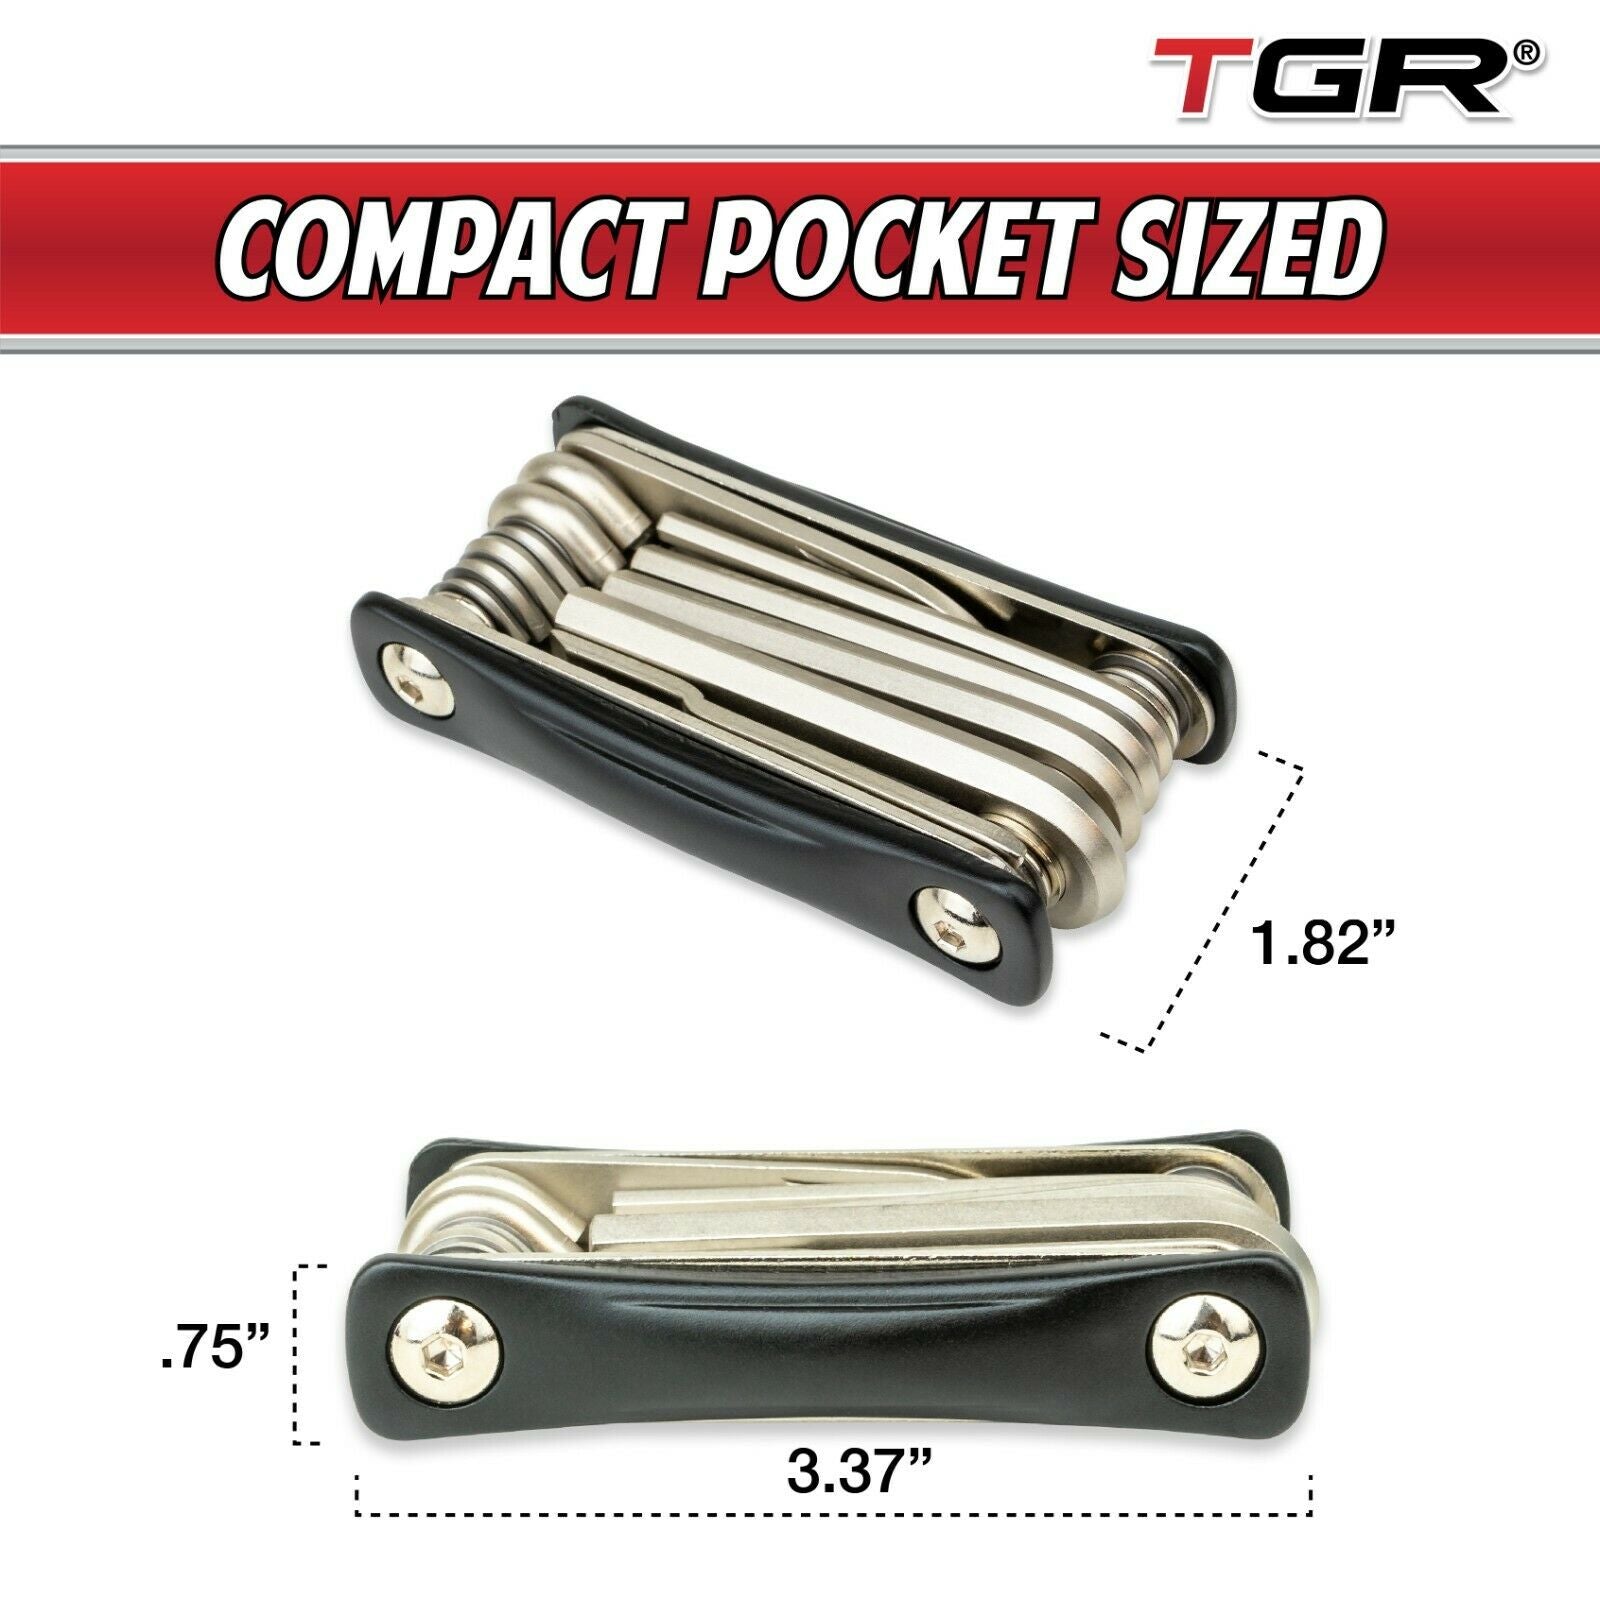 TGR 19 in 1 Folding Multi-Function Bicycle Tool - Heavy Duty, Compact Pocket Sized, Lightweight - for Road and Mountain Bikes